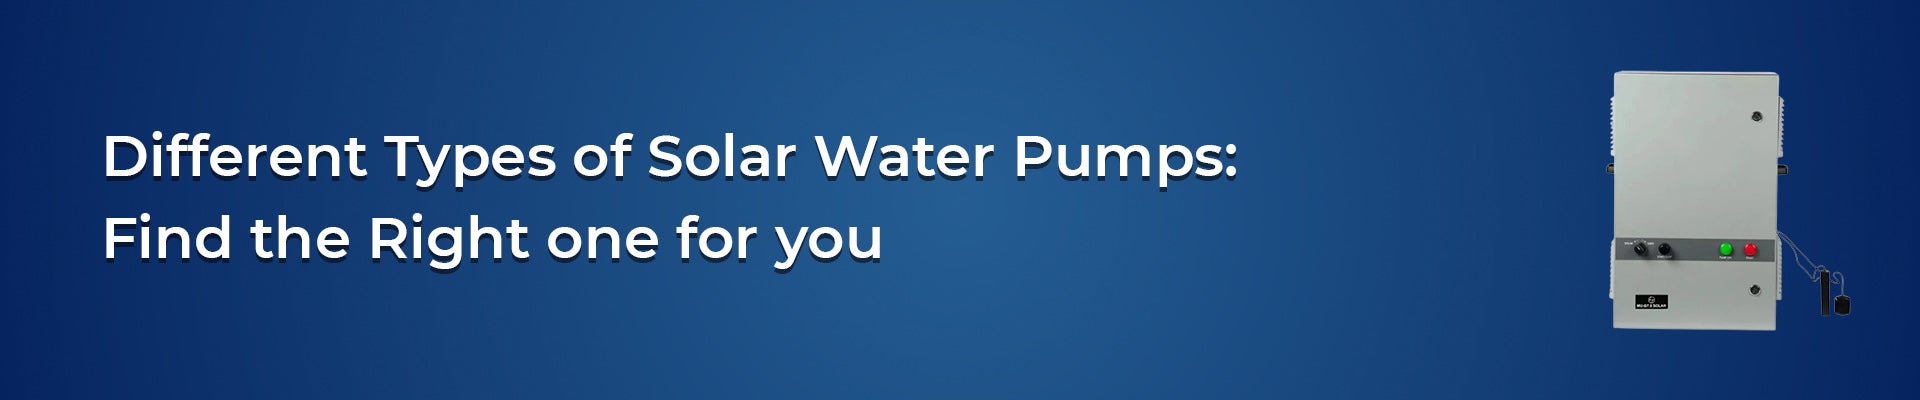 Different Types of Solar Water Pumps: Which One is Right for You?